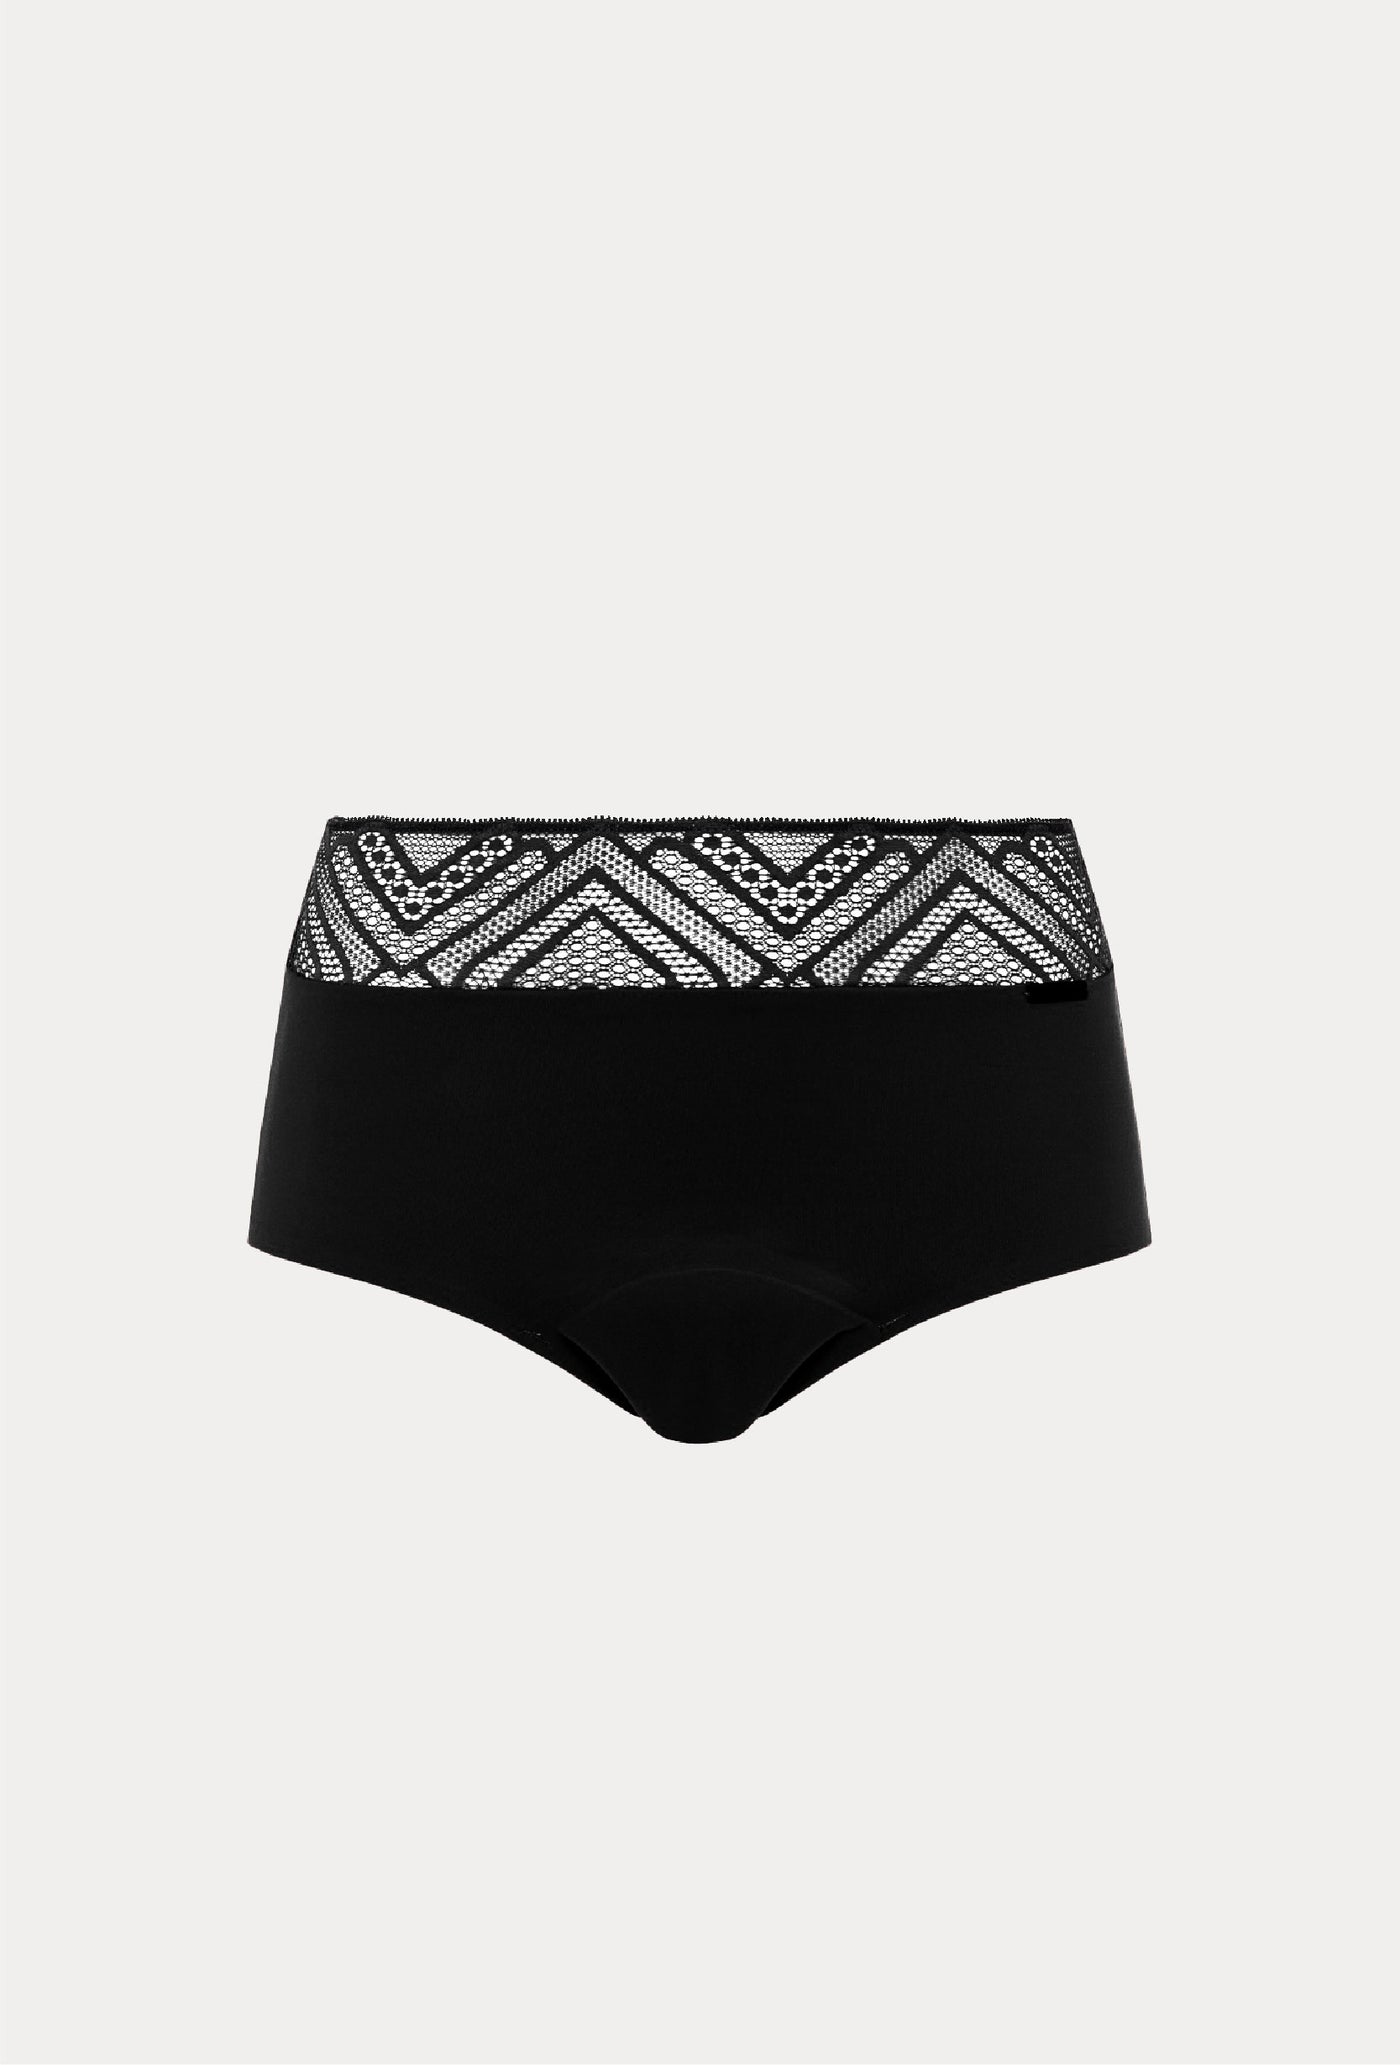 Chantelle Life Period Panty Lace Highwaist Brief